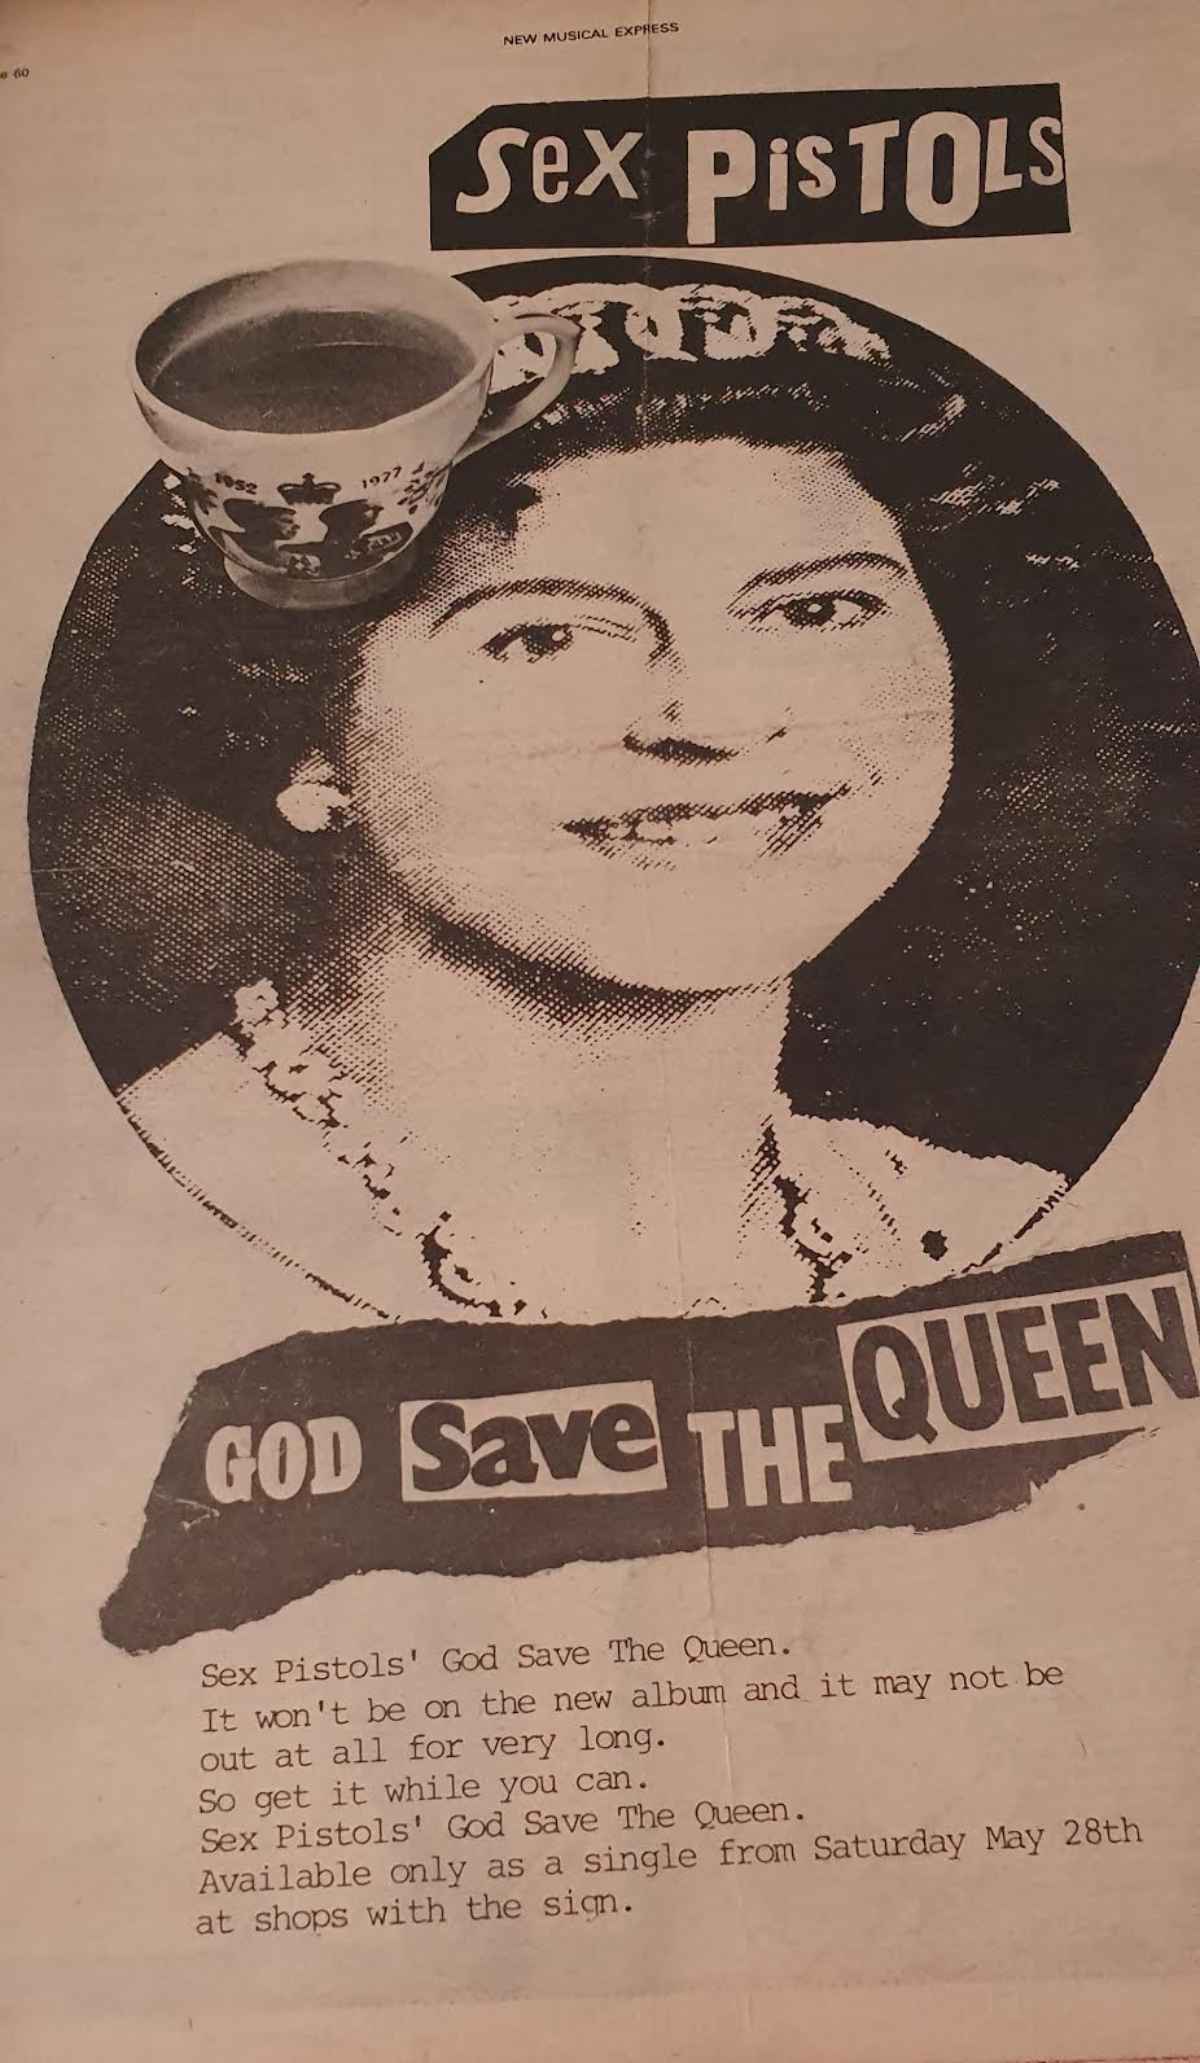 God Save The Queen ad